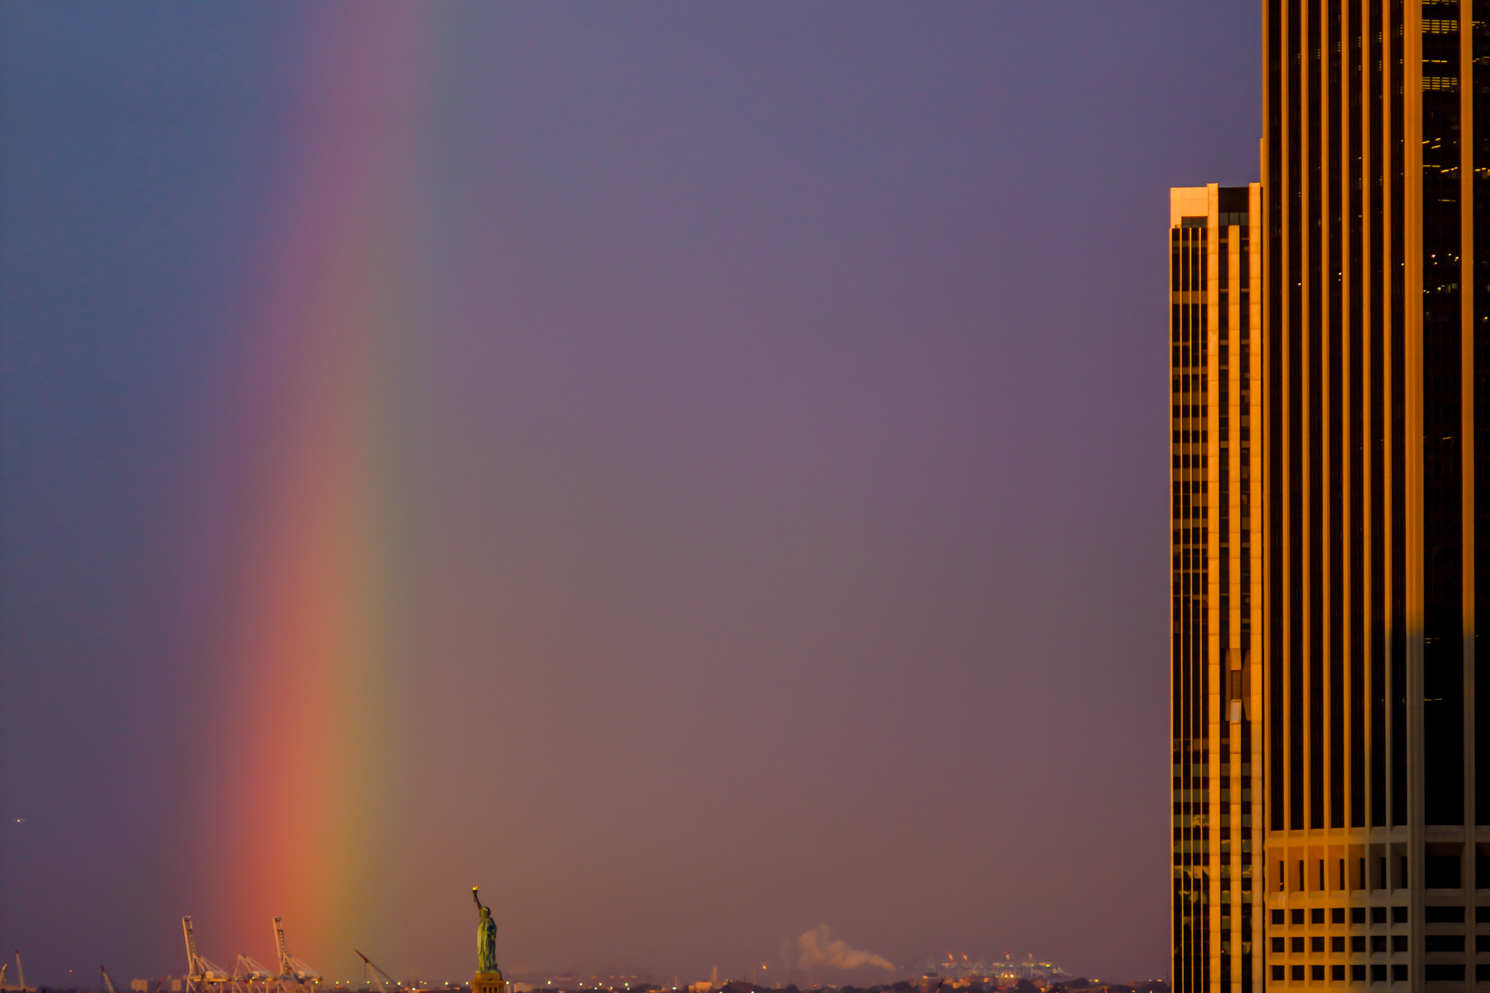 A rainbow to the left; the Statue of Liberty at the bottom and white office building cast in golden sunrise light to the right.